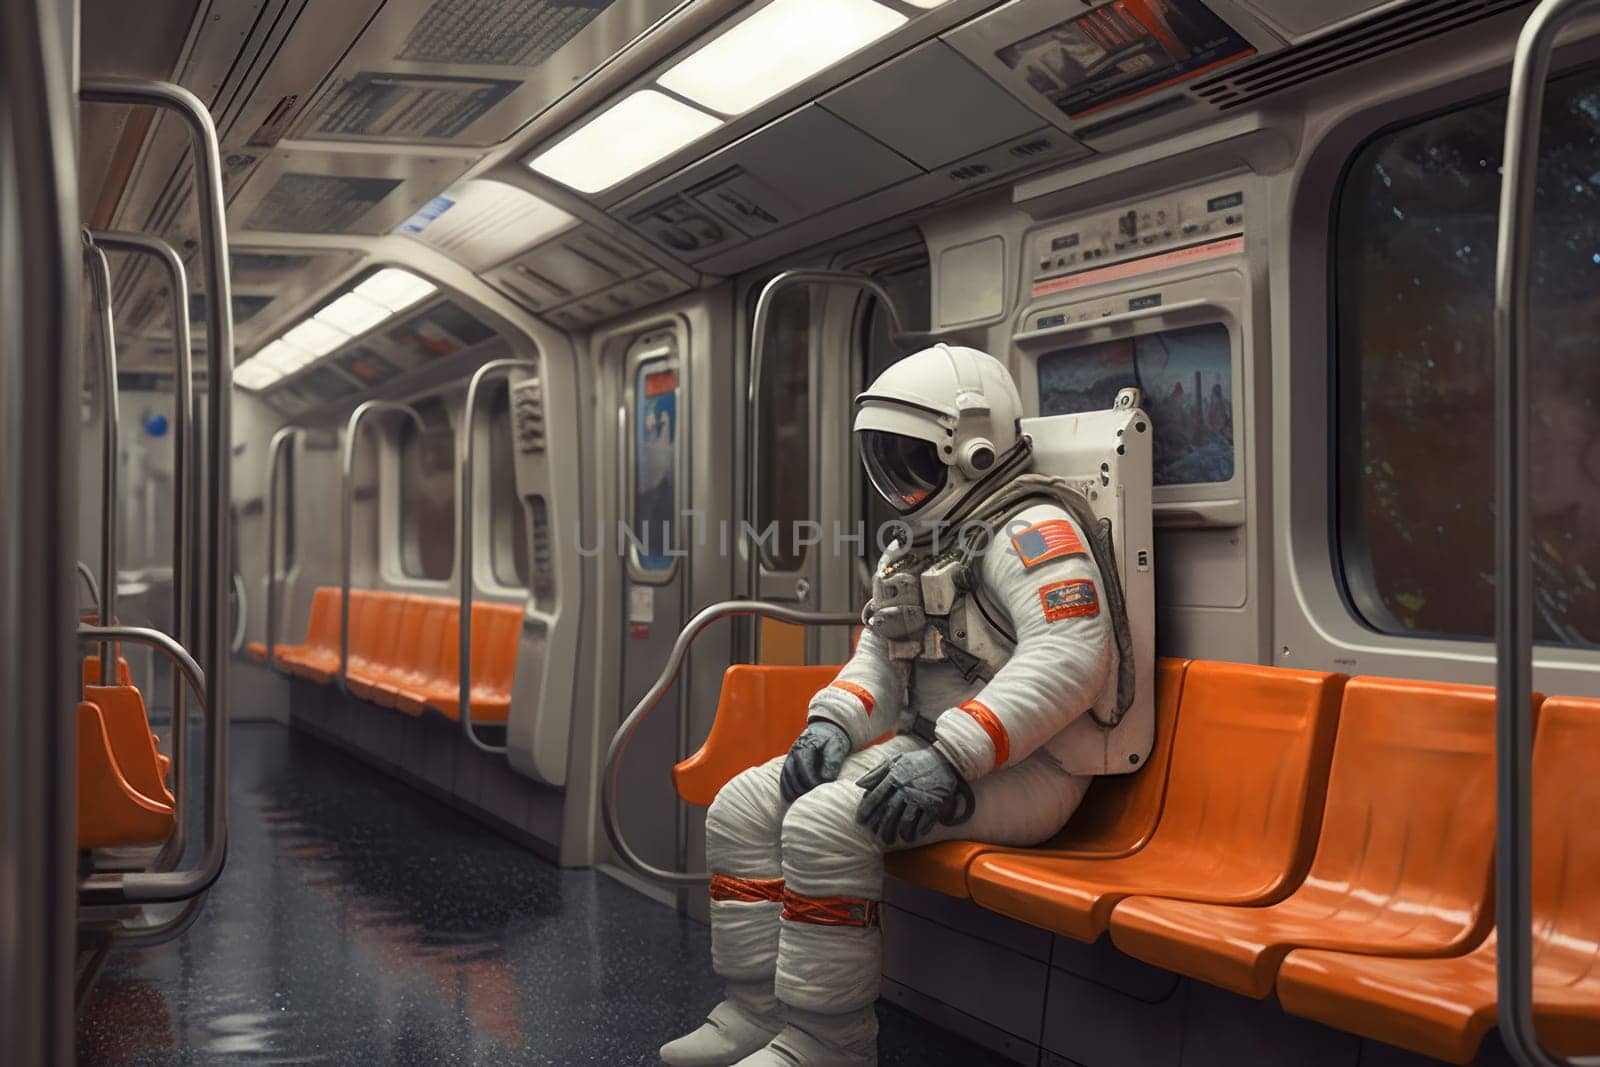 An astronaut in the subway. Astronaut in the urban environment.